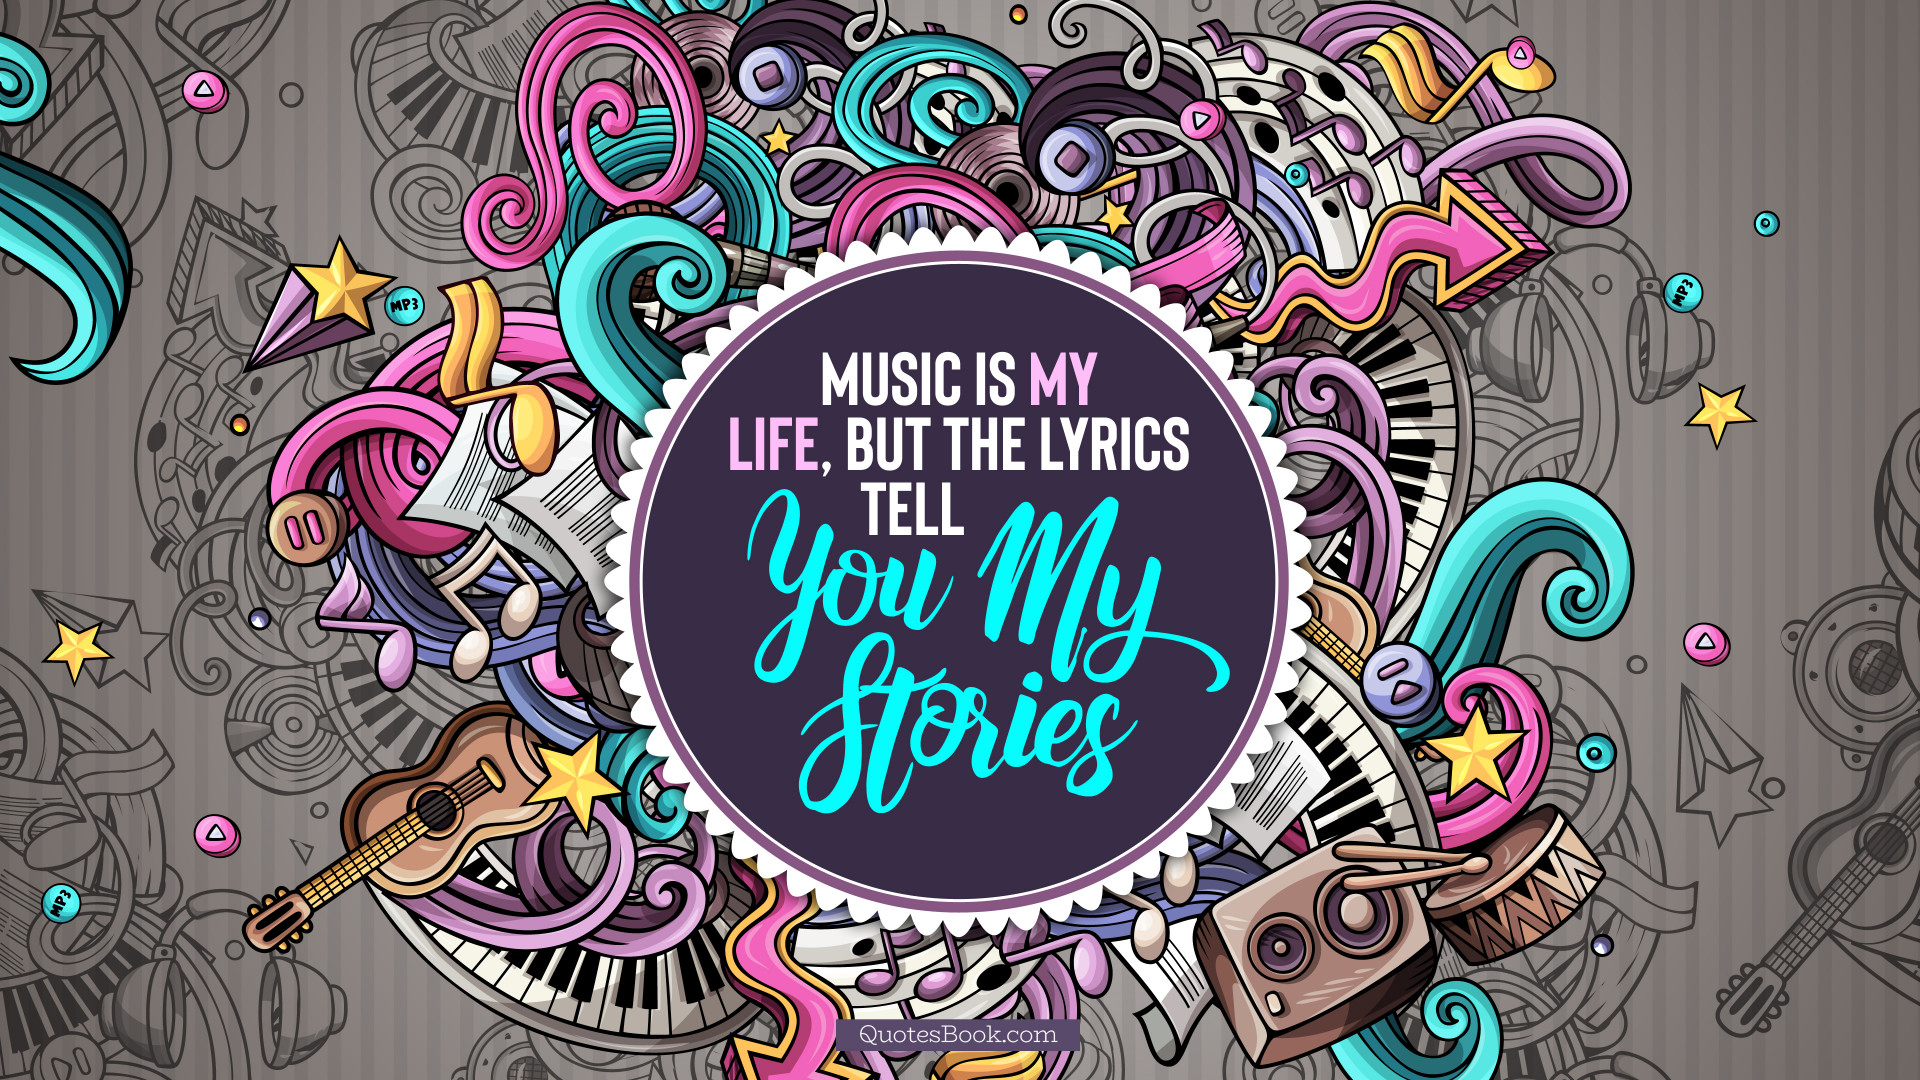 Music is my life, but the lyrics tell you my stories - QuotesBook